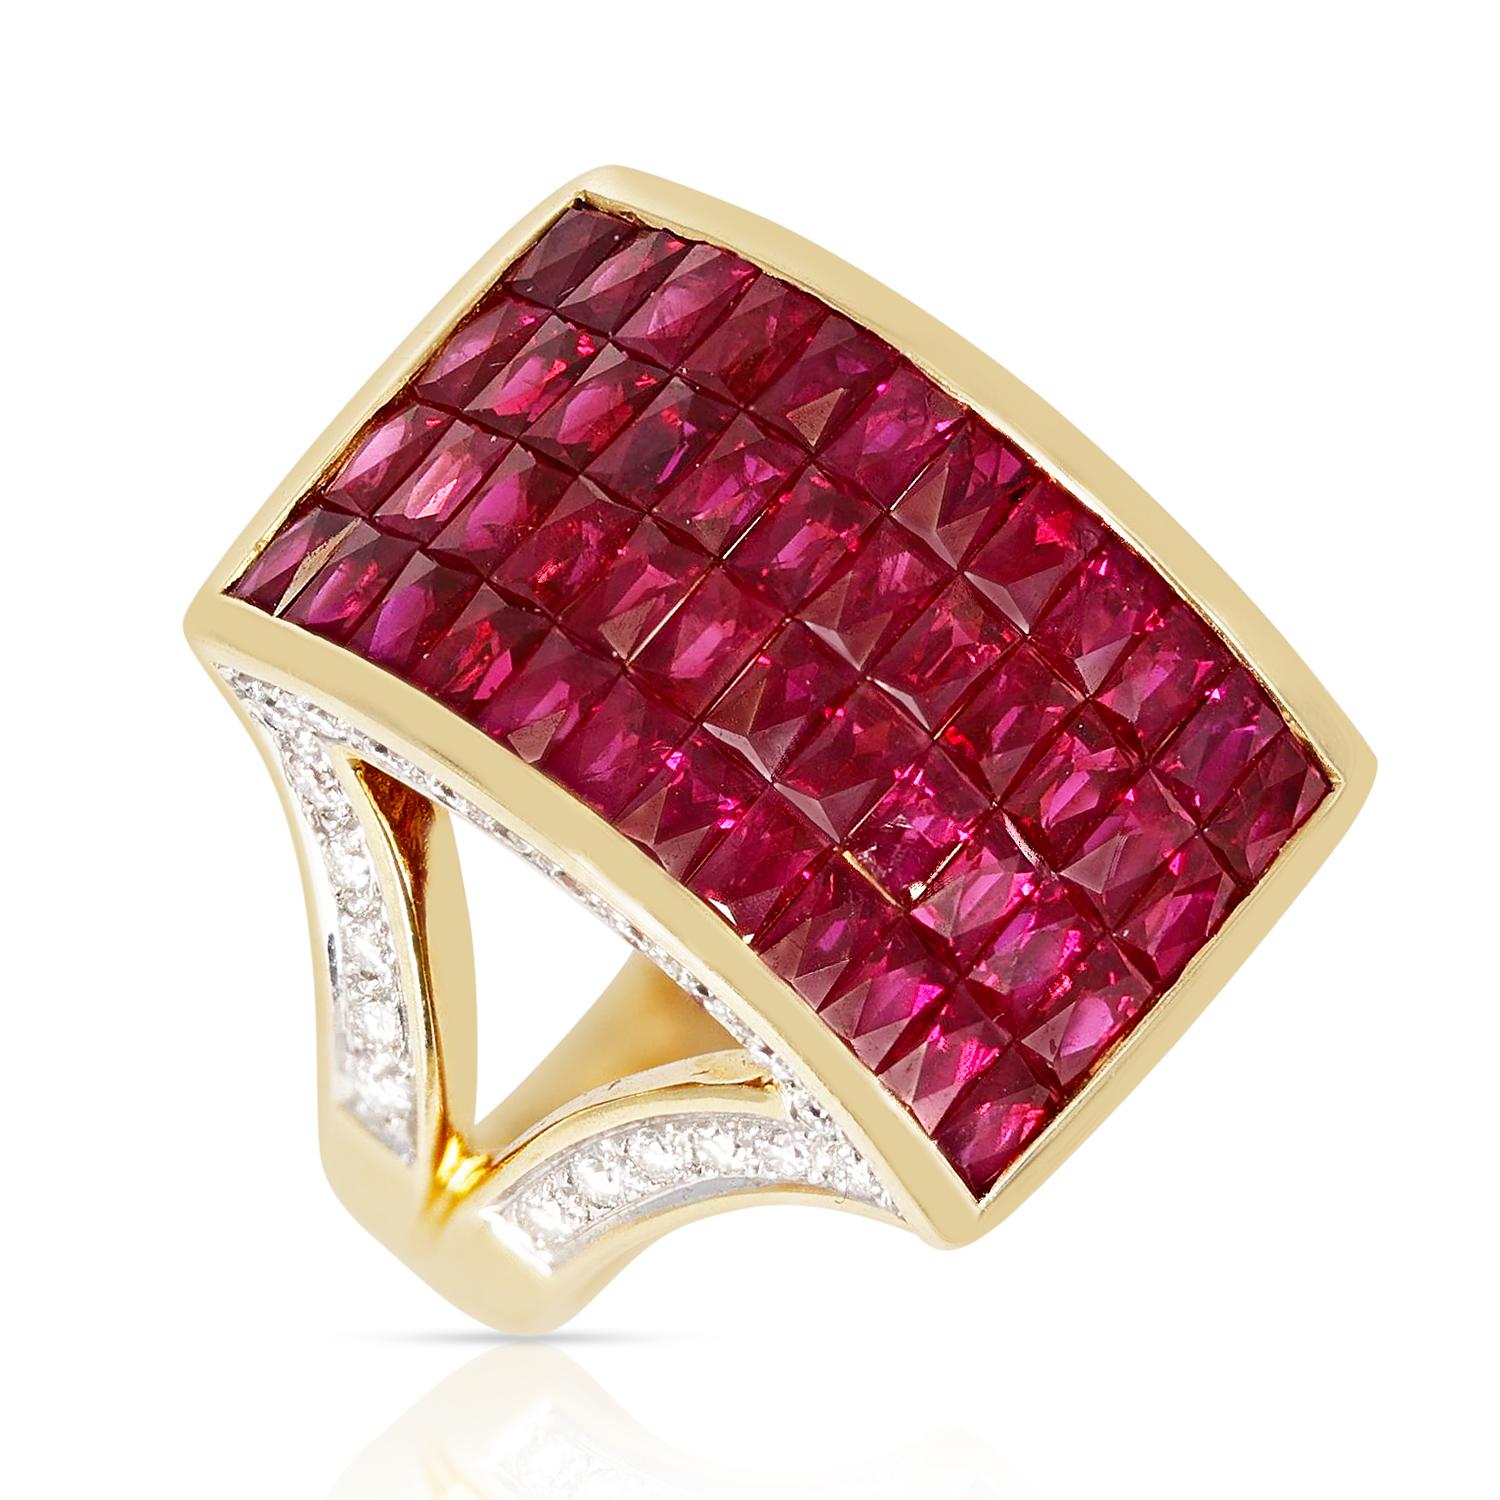 An Invisible-Set Ruby and Diamond Cocktail Ring made in 18k Yellow Gold. The Ring Size is US 9.75. The total weight of the ring is 13.84 grams. 

